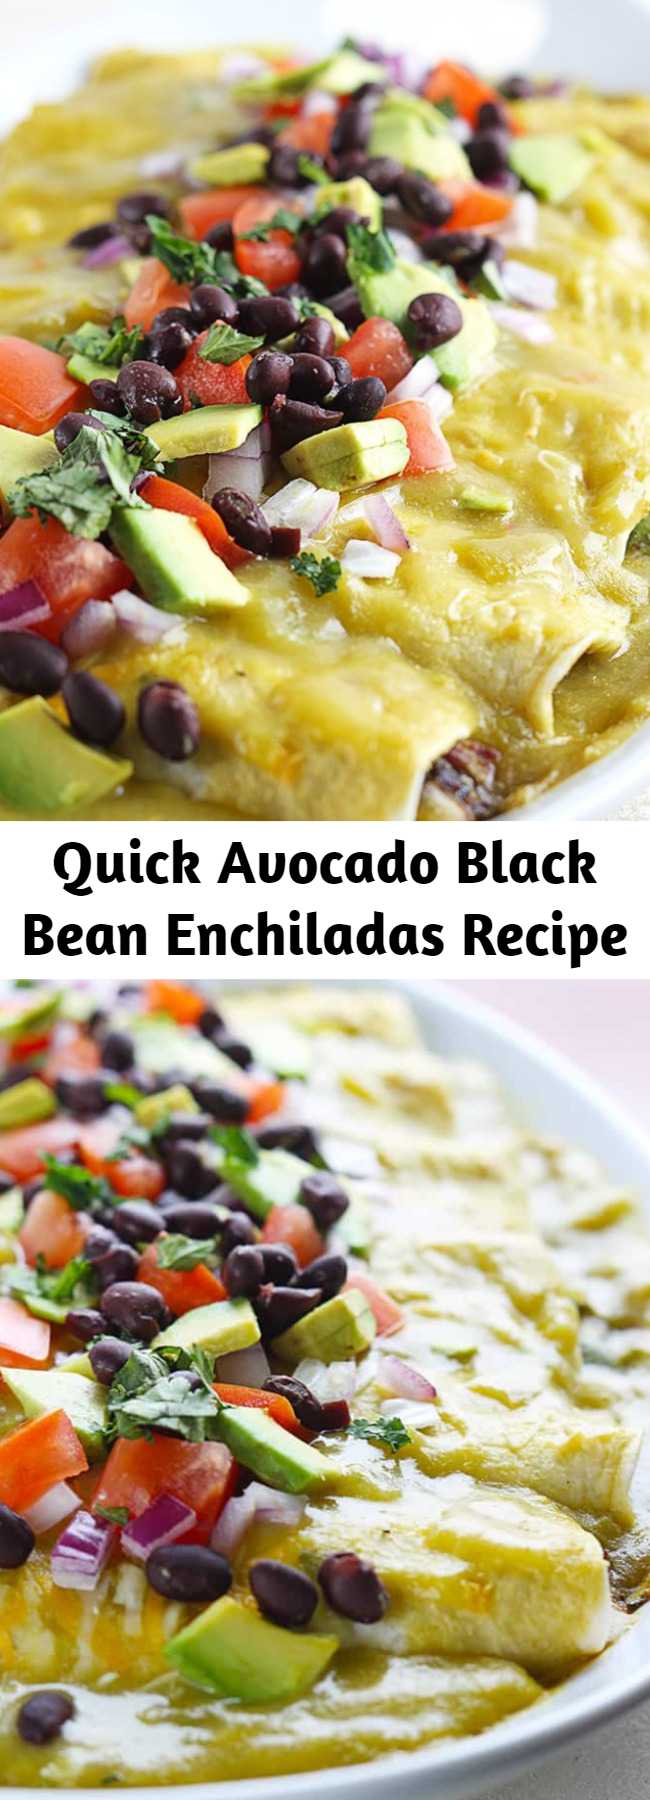 Quick Avocado Black Bean Enchiladas Recipe - Healthy and tasty enchiladas filled with seasoned black beans and creamy avocado slices, all covered in green chile enchilada sauce! Ready in 30 minutes!